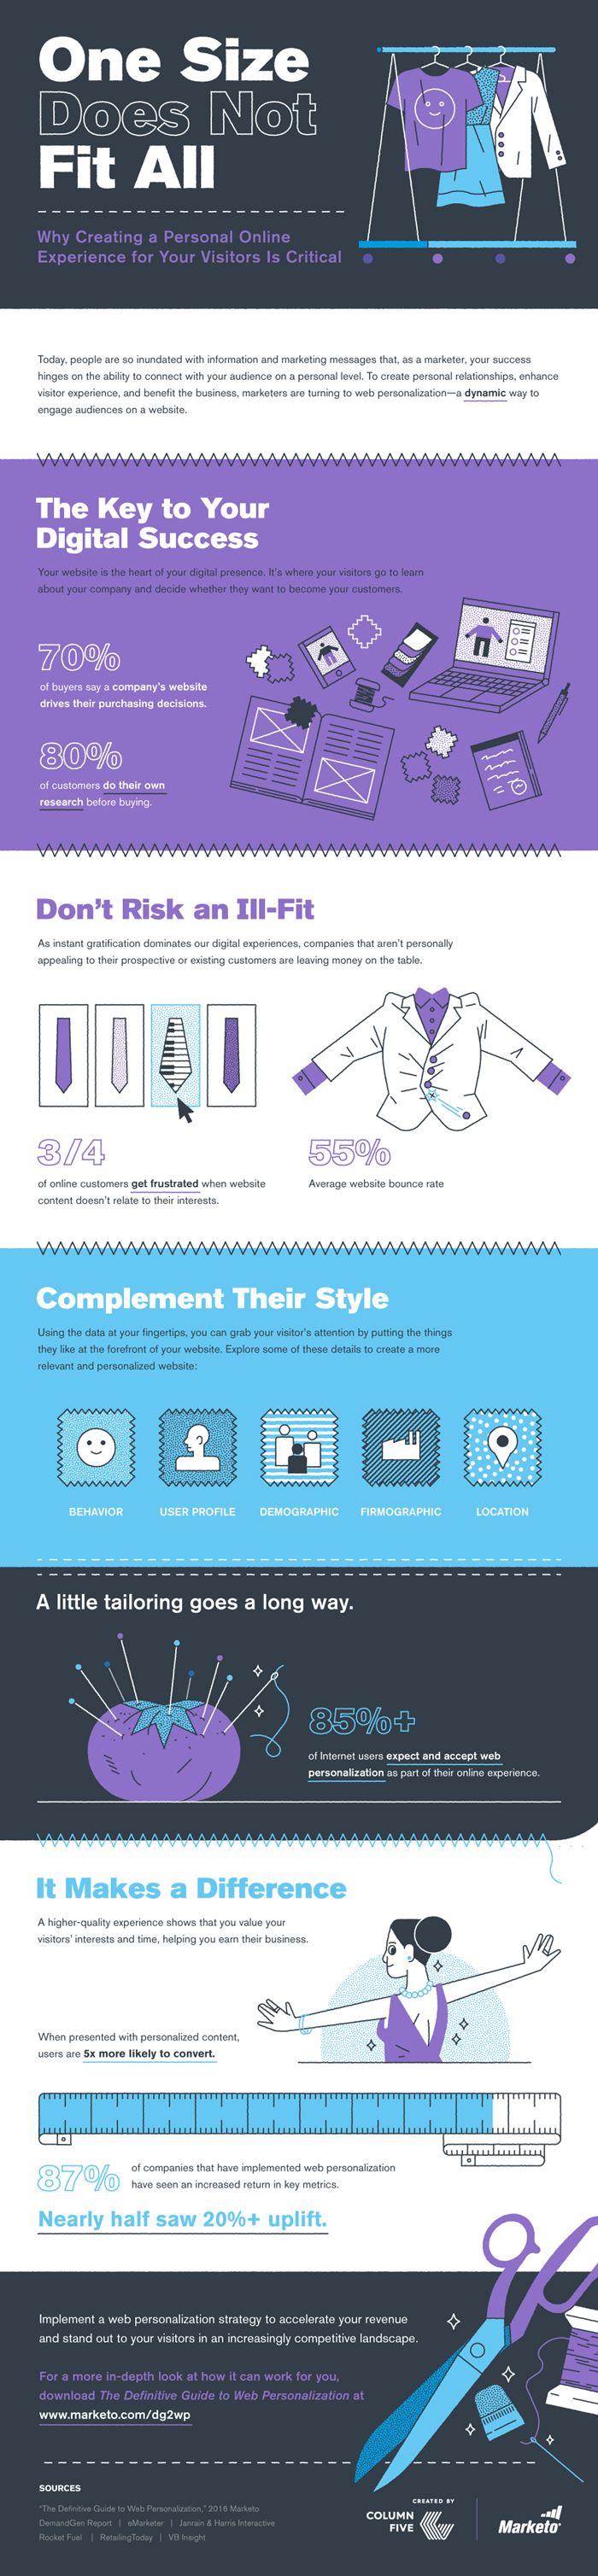 One-Size-Does-Not-Fit-All_Web-Personalization_Marketo_Infographic-700